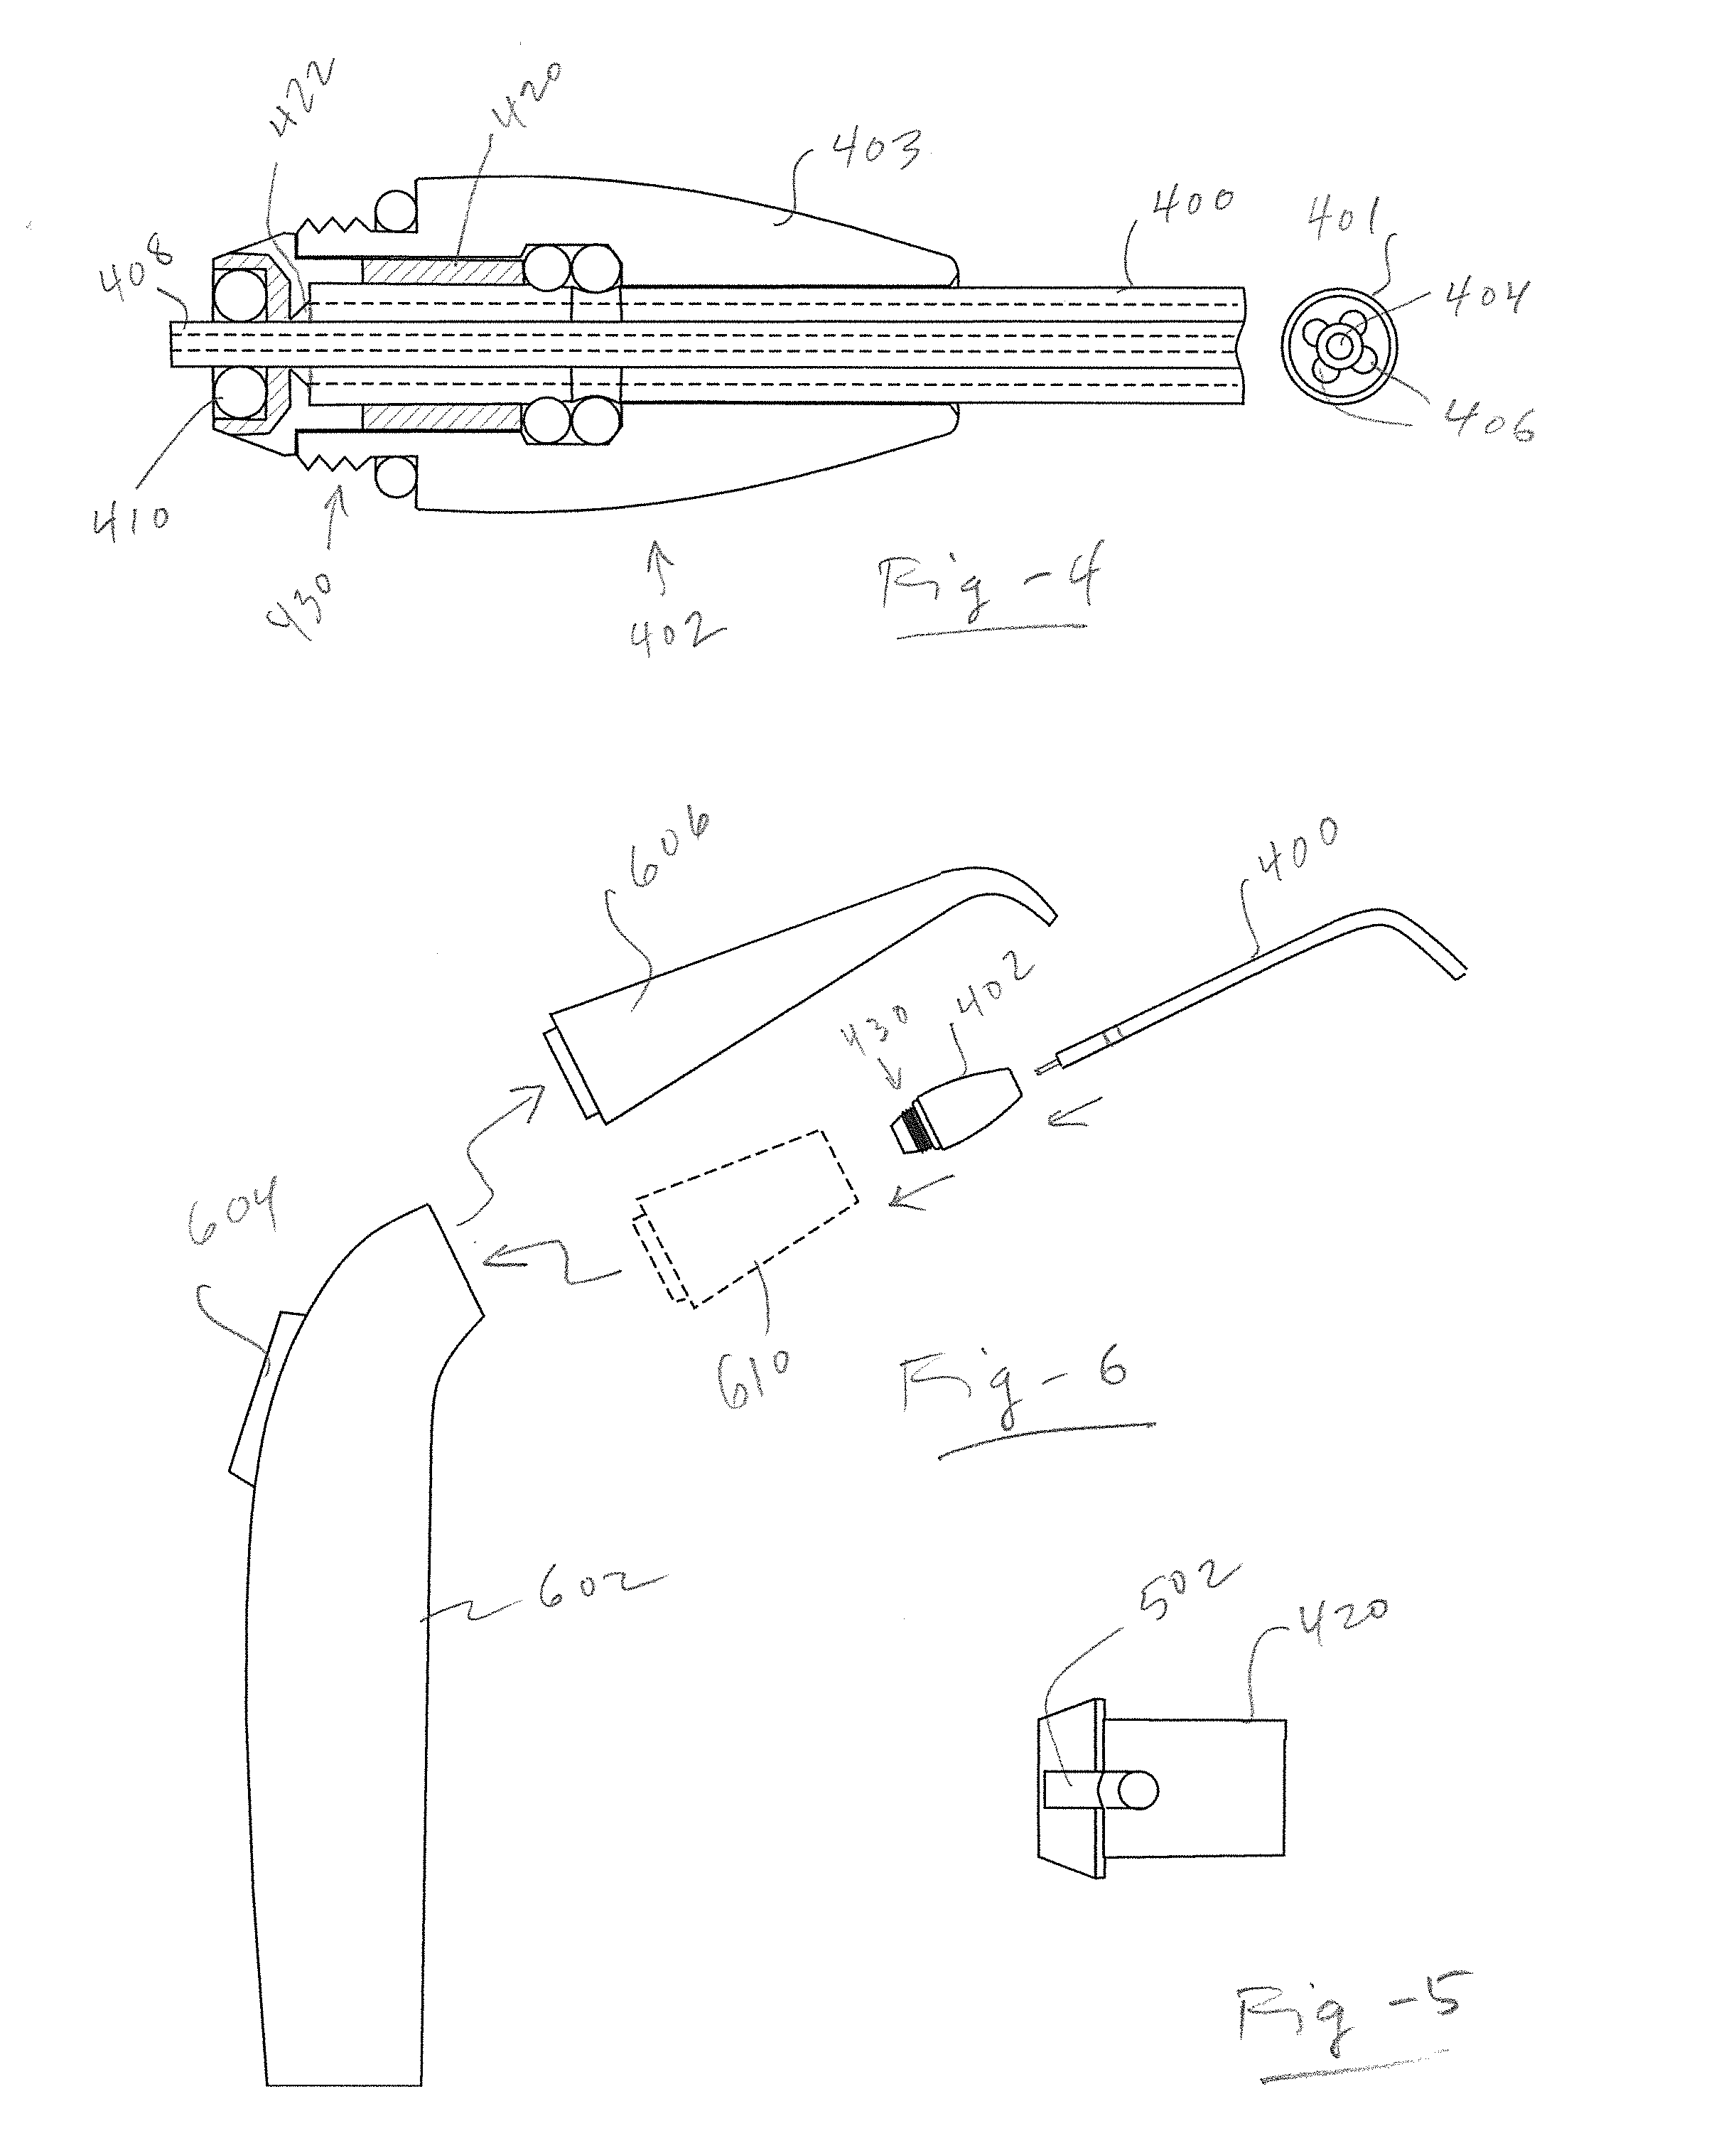 Air/water dental syringe tip adapter systems and conversion methods